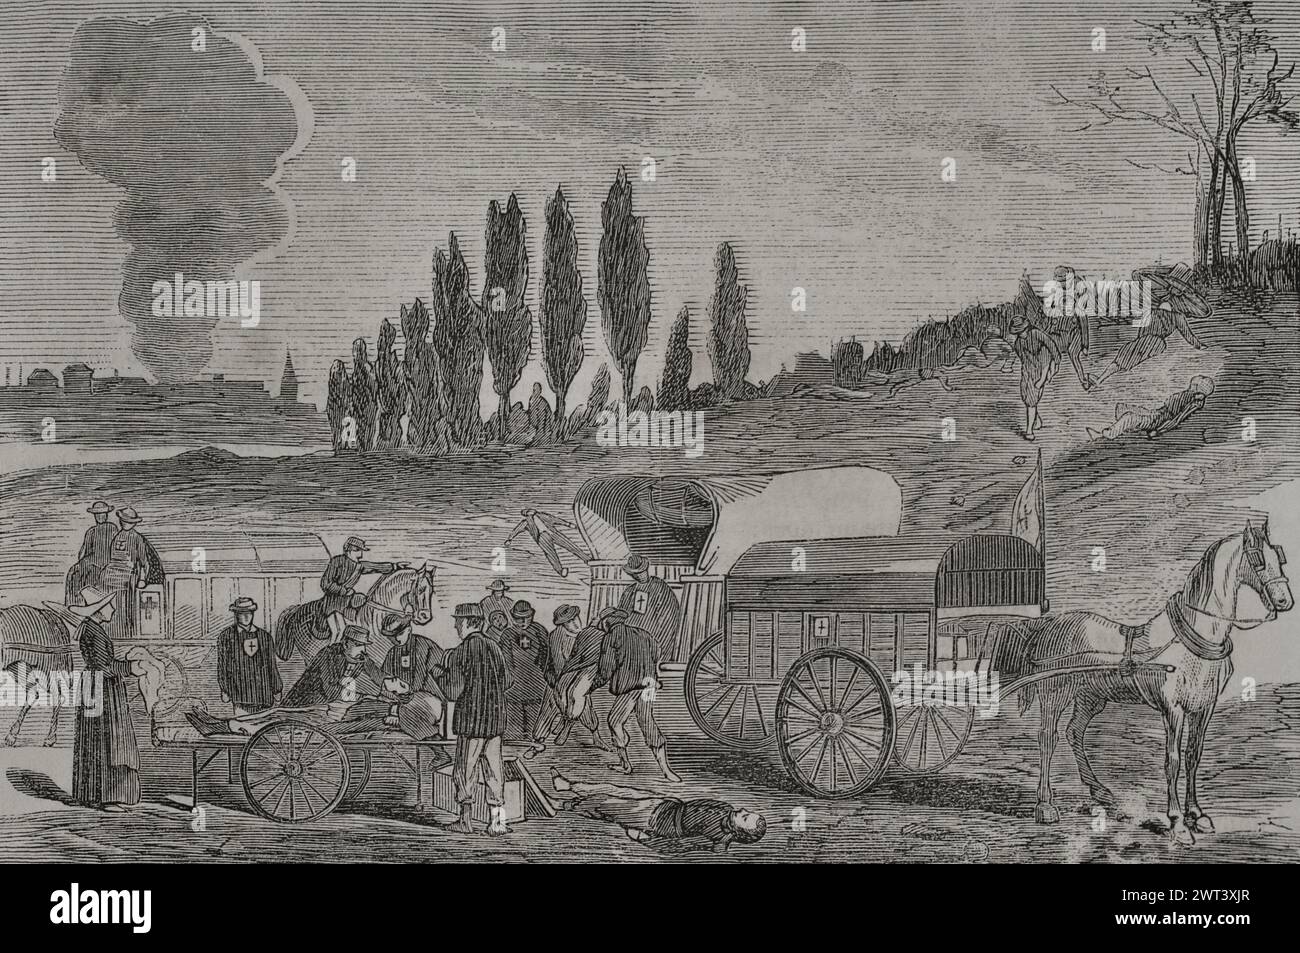 Franco-Prussian War (1870-1871). Burial of the dead by ambulances. Engraving. 'Historia de la Guerra de Francia y Prusia' (History of the War between France and Prussia). Volume II. Published in Barcelona, 1871. Stock Photo